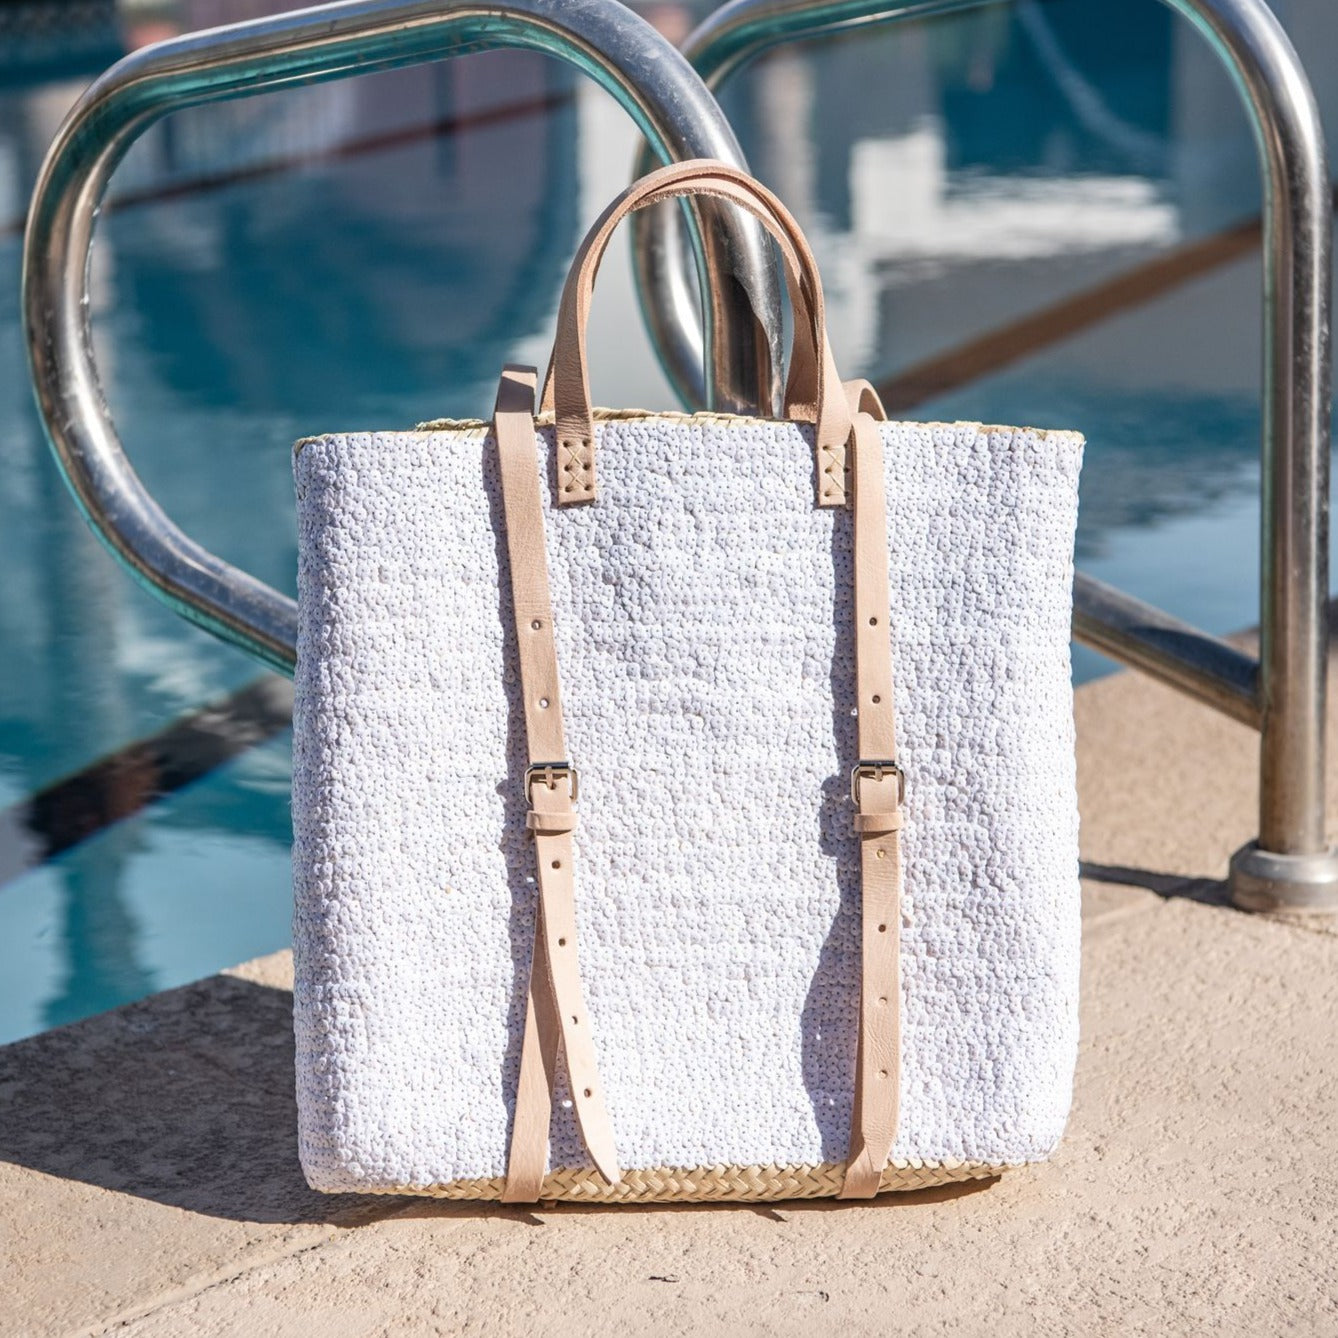 Straw backpack with white sequins sitting on pool deck